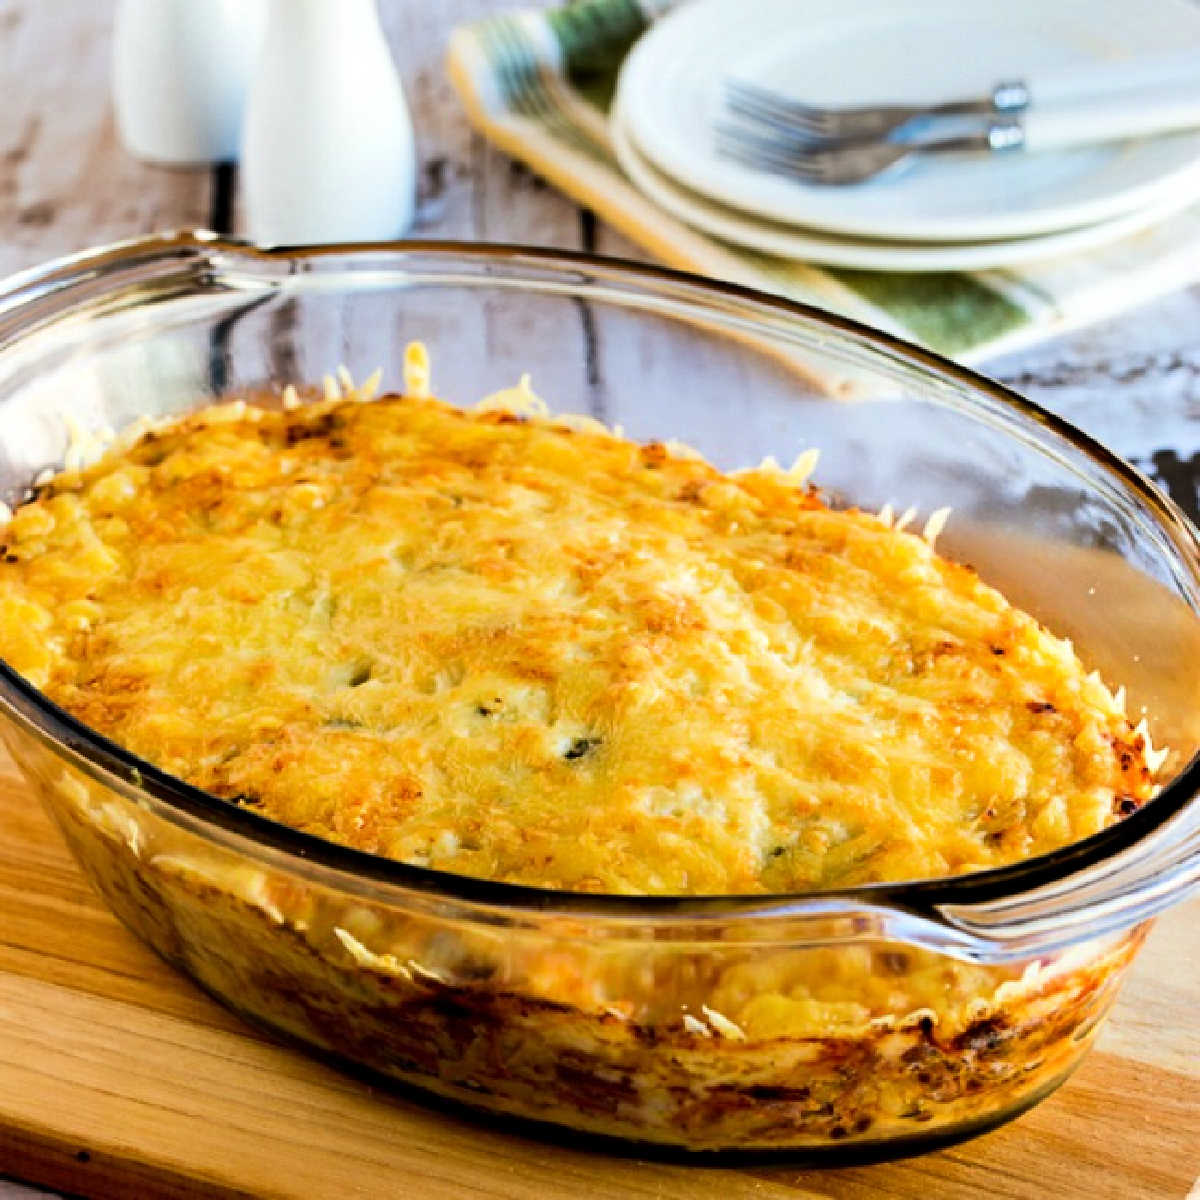 A square image of a low carb Reuben bake presented in a casserole dish with a plate, fork, salt and pepper.